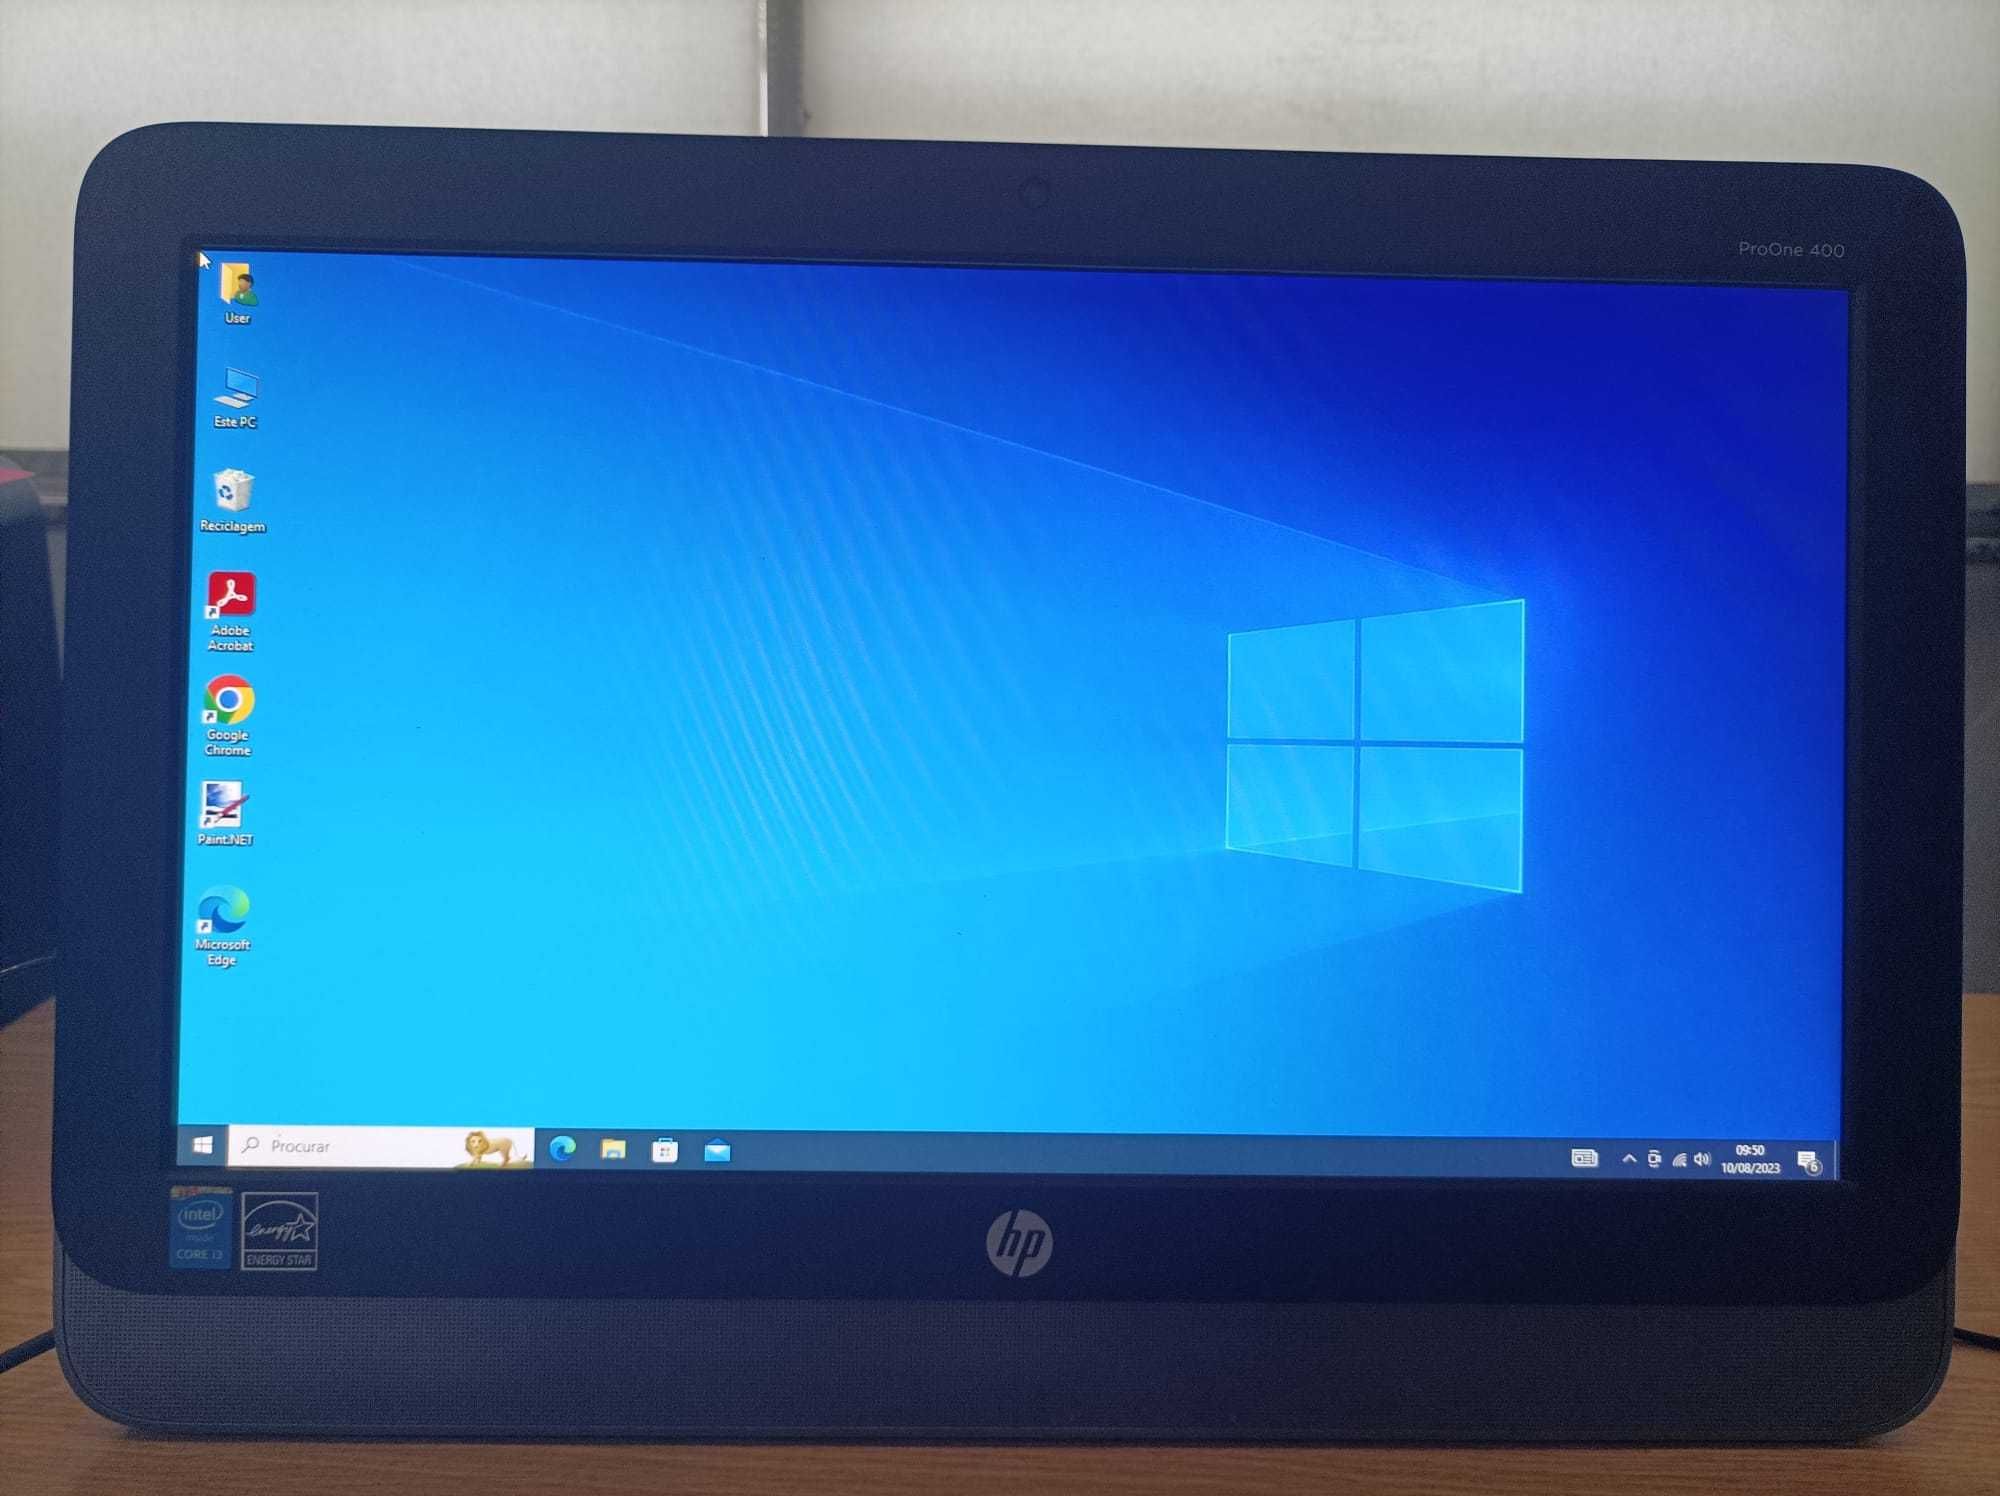 HP PC All-in-one (Pro One 400)